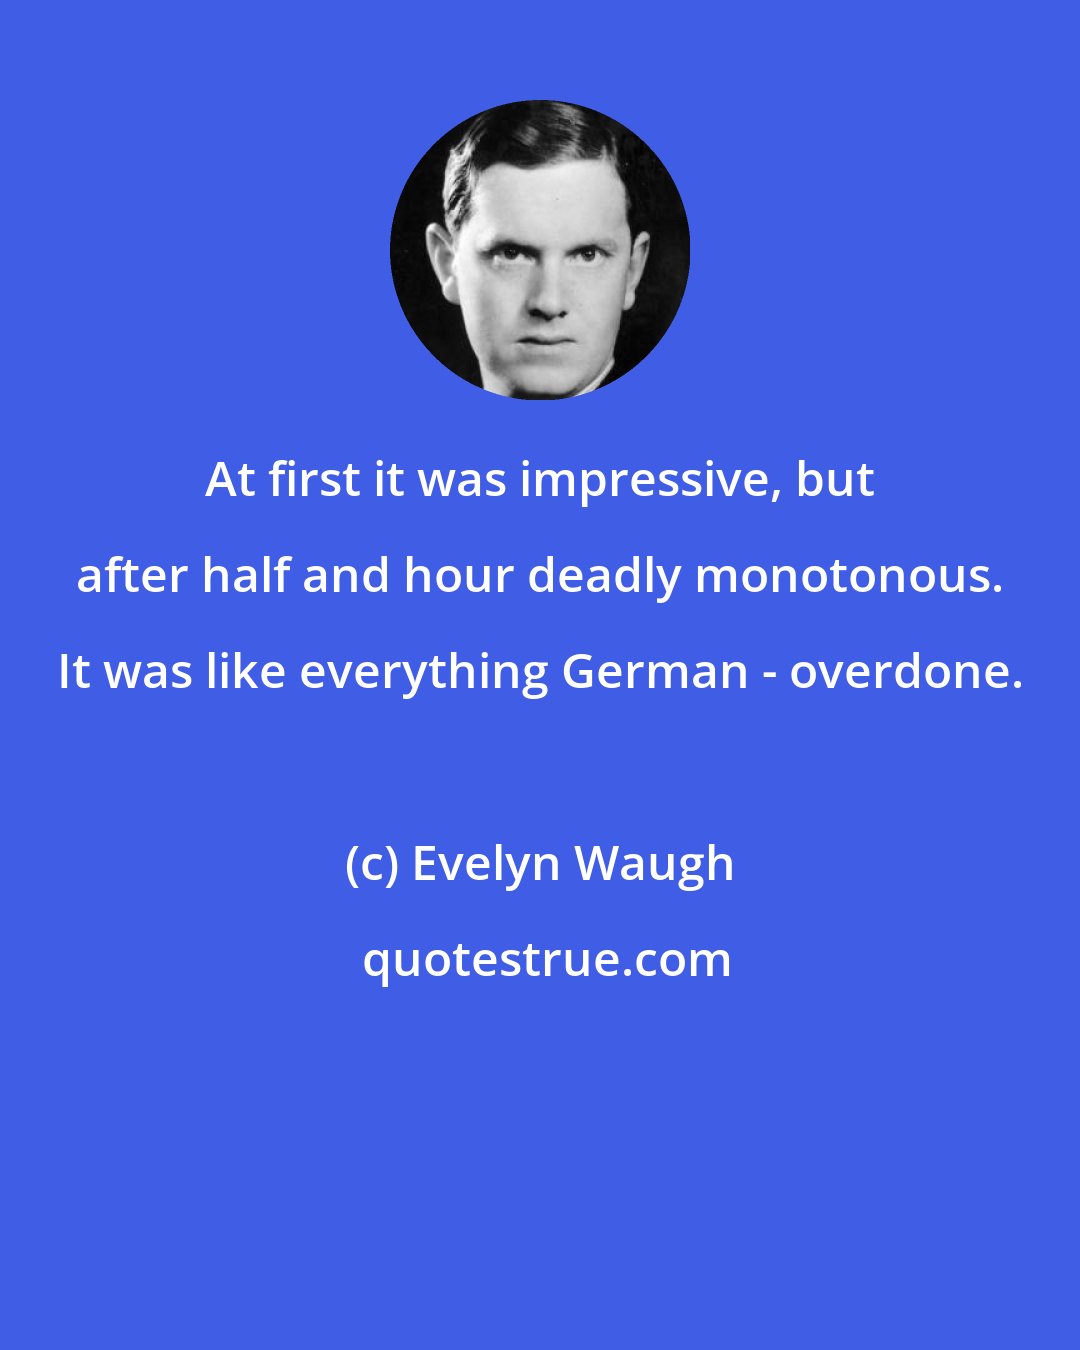 Evelyn Waugh: At first it was impressive, but after half and hour deadly monotonous. It was like everything German - overdone.